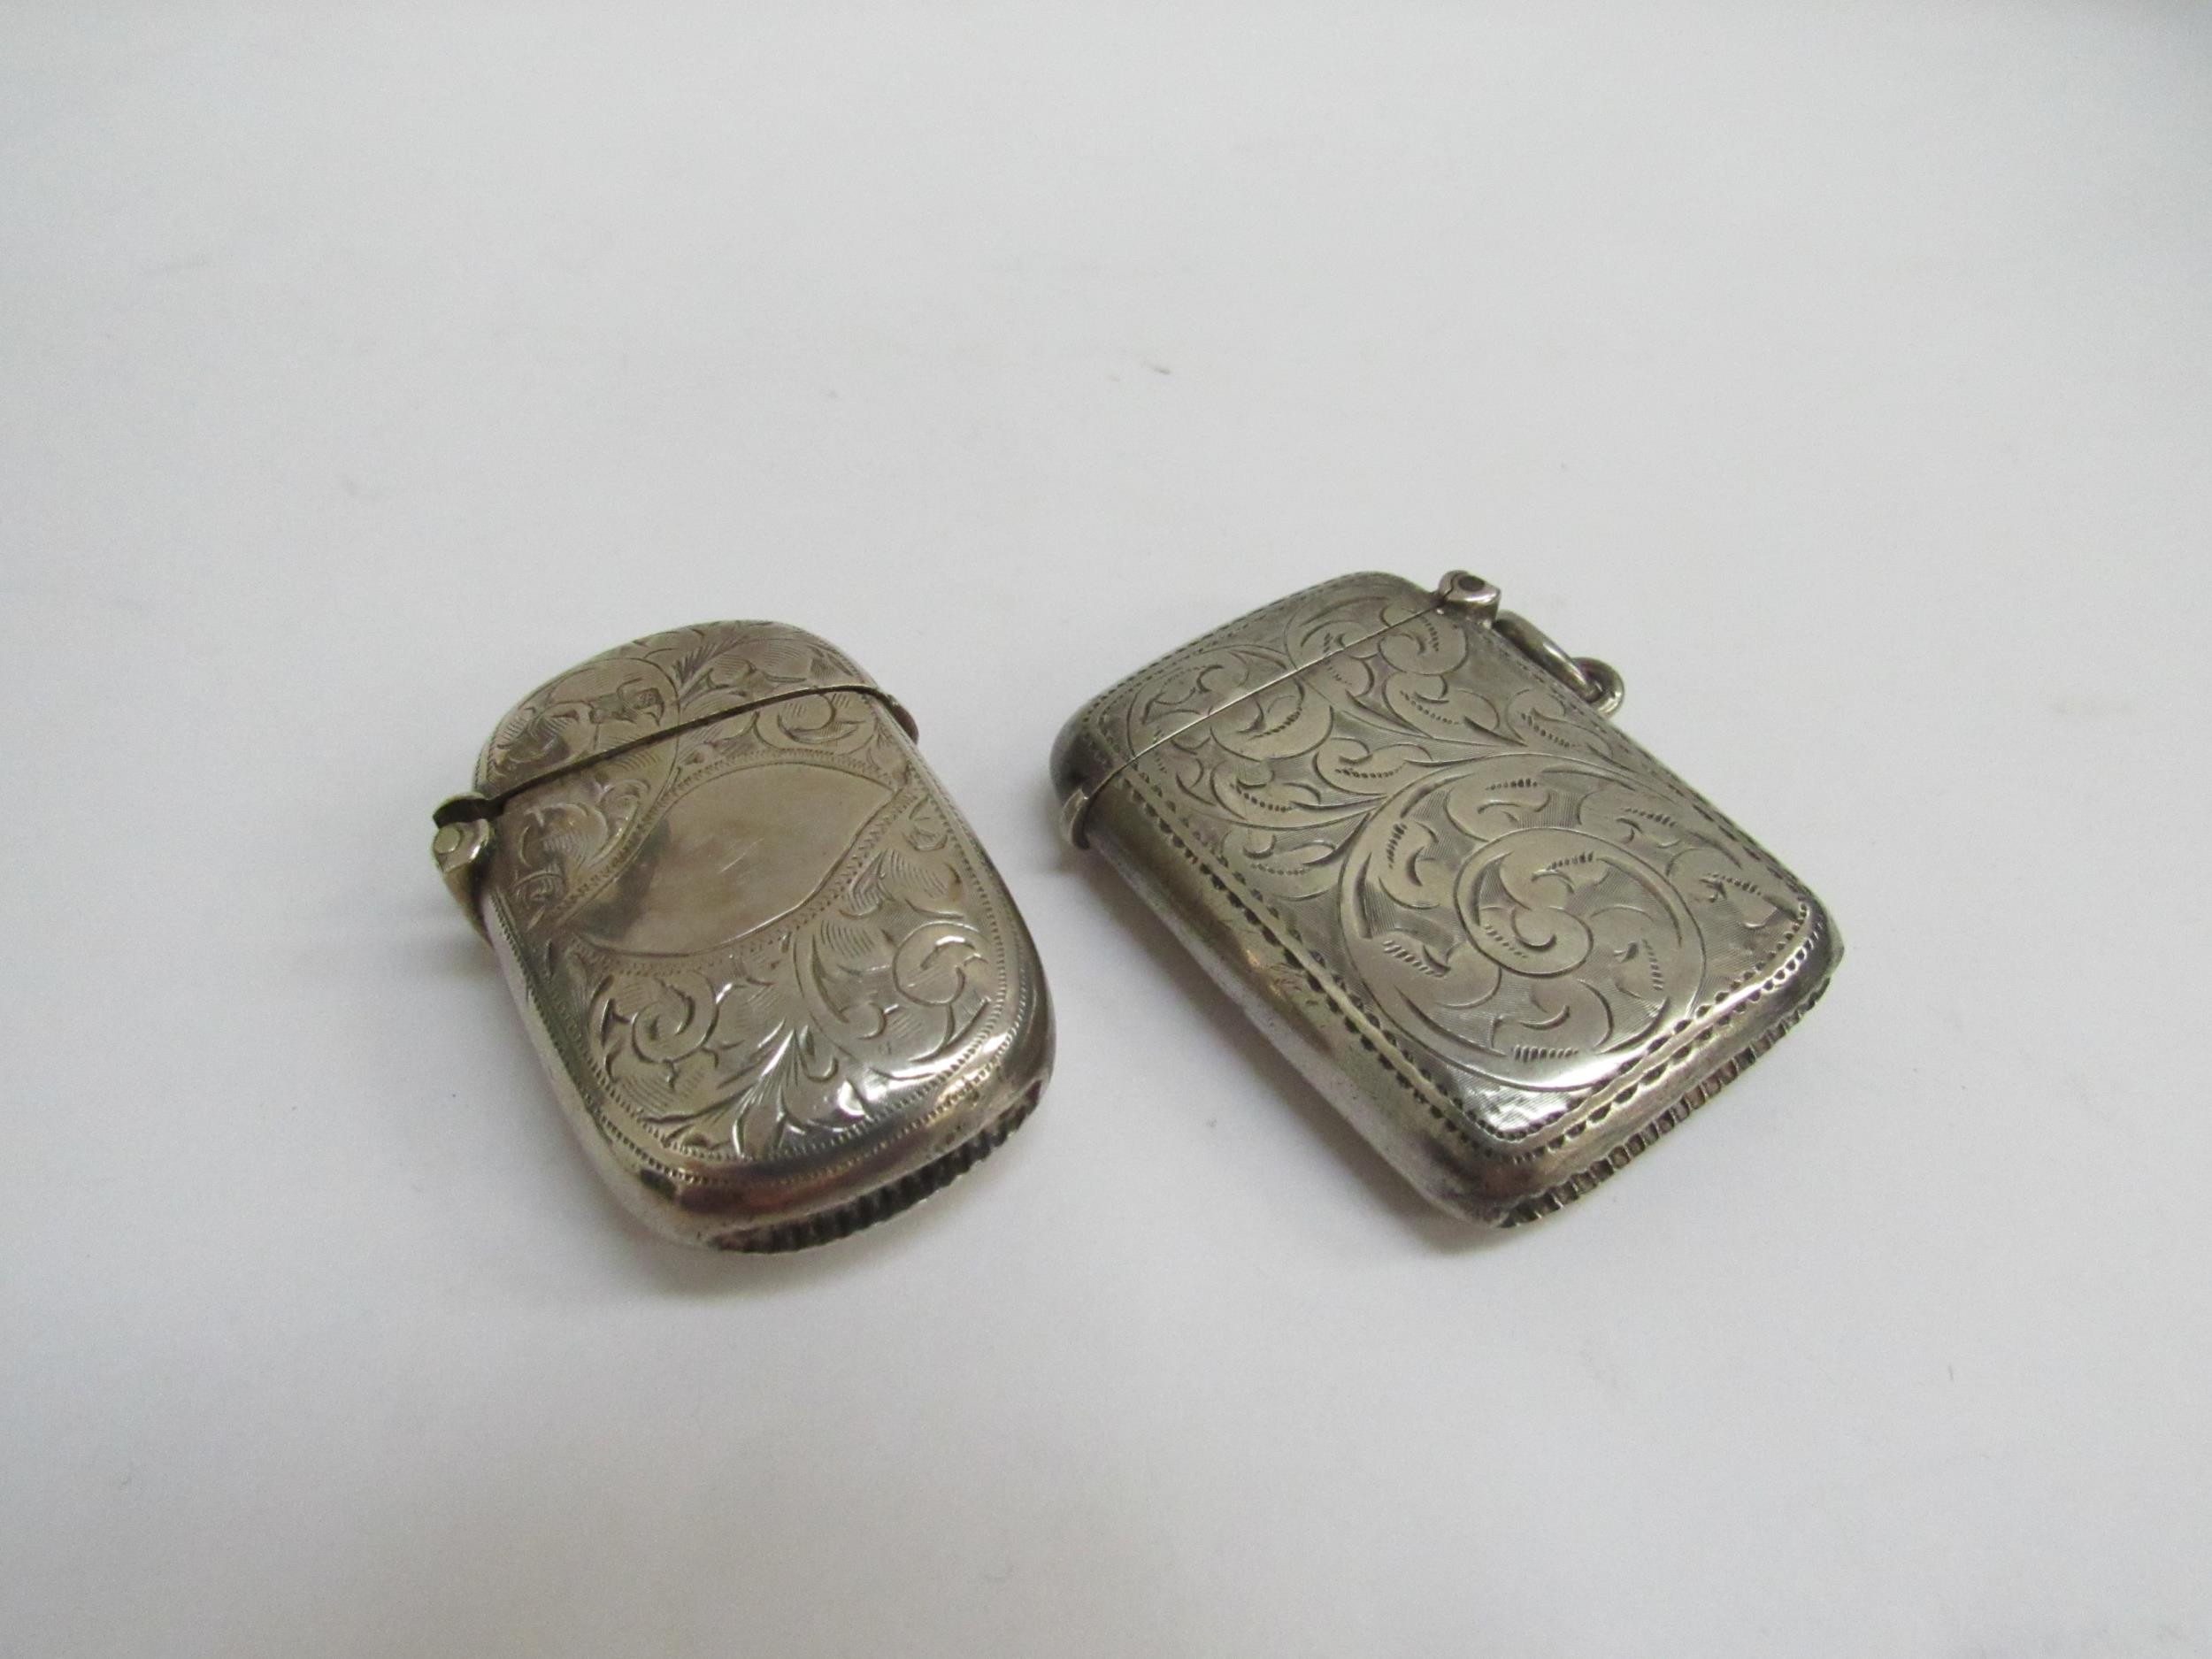 Two silver vestas with engraved decoration one "Emily to Will Christmas 1908"